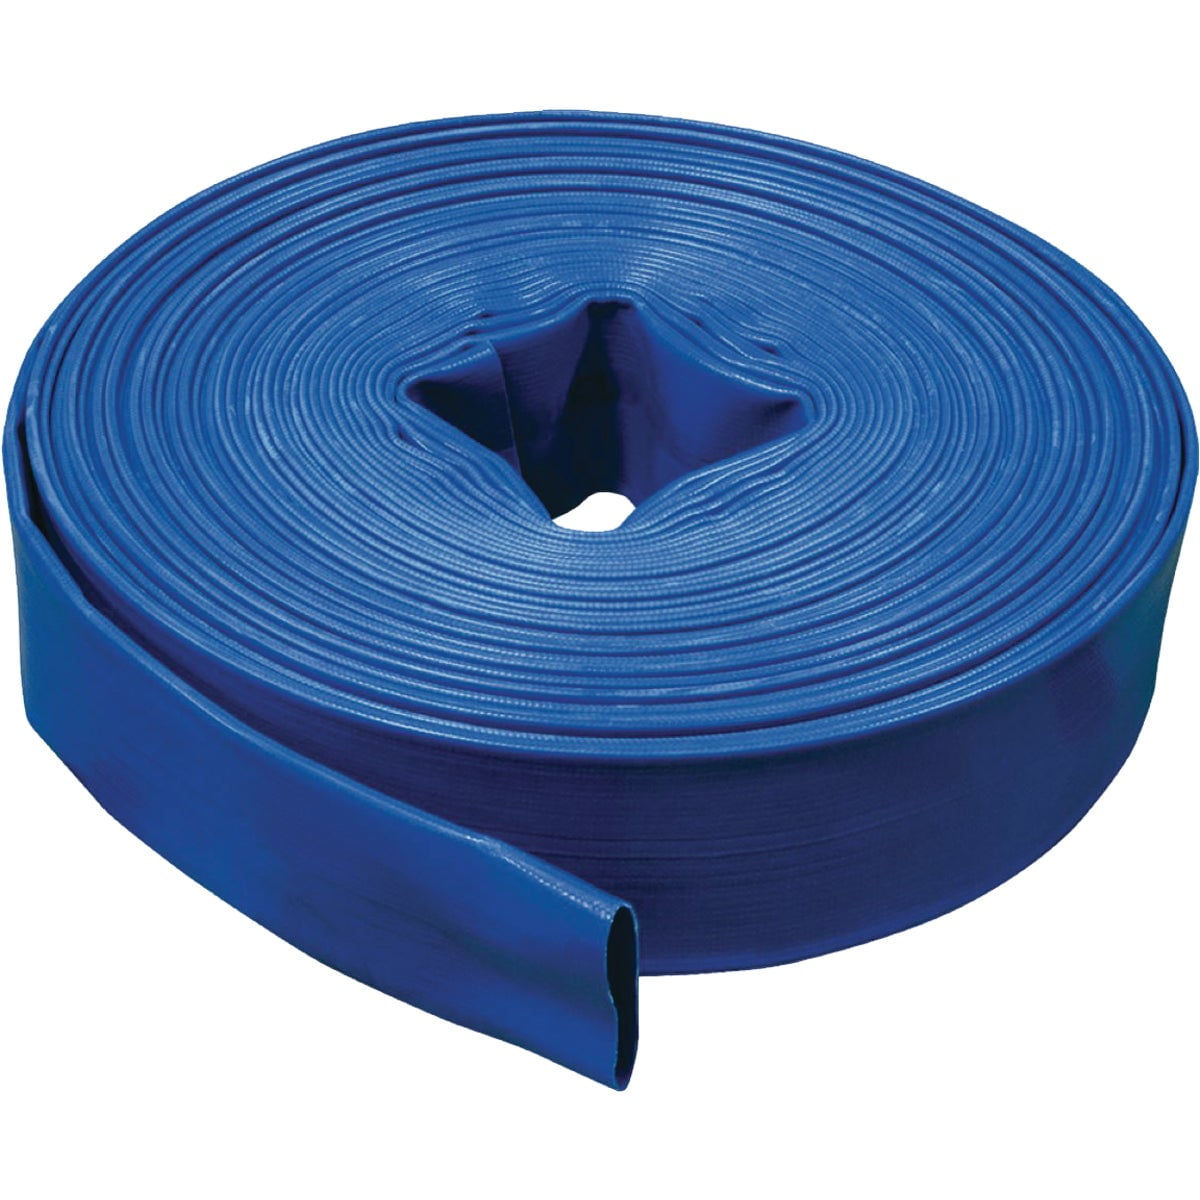 x 50 ft. Duromax Discharge Hose Water Pump Heavy Duty Rugged Flexible PVC 4 in 